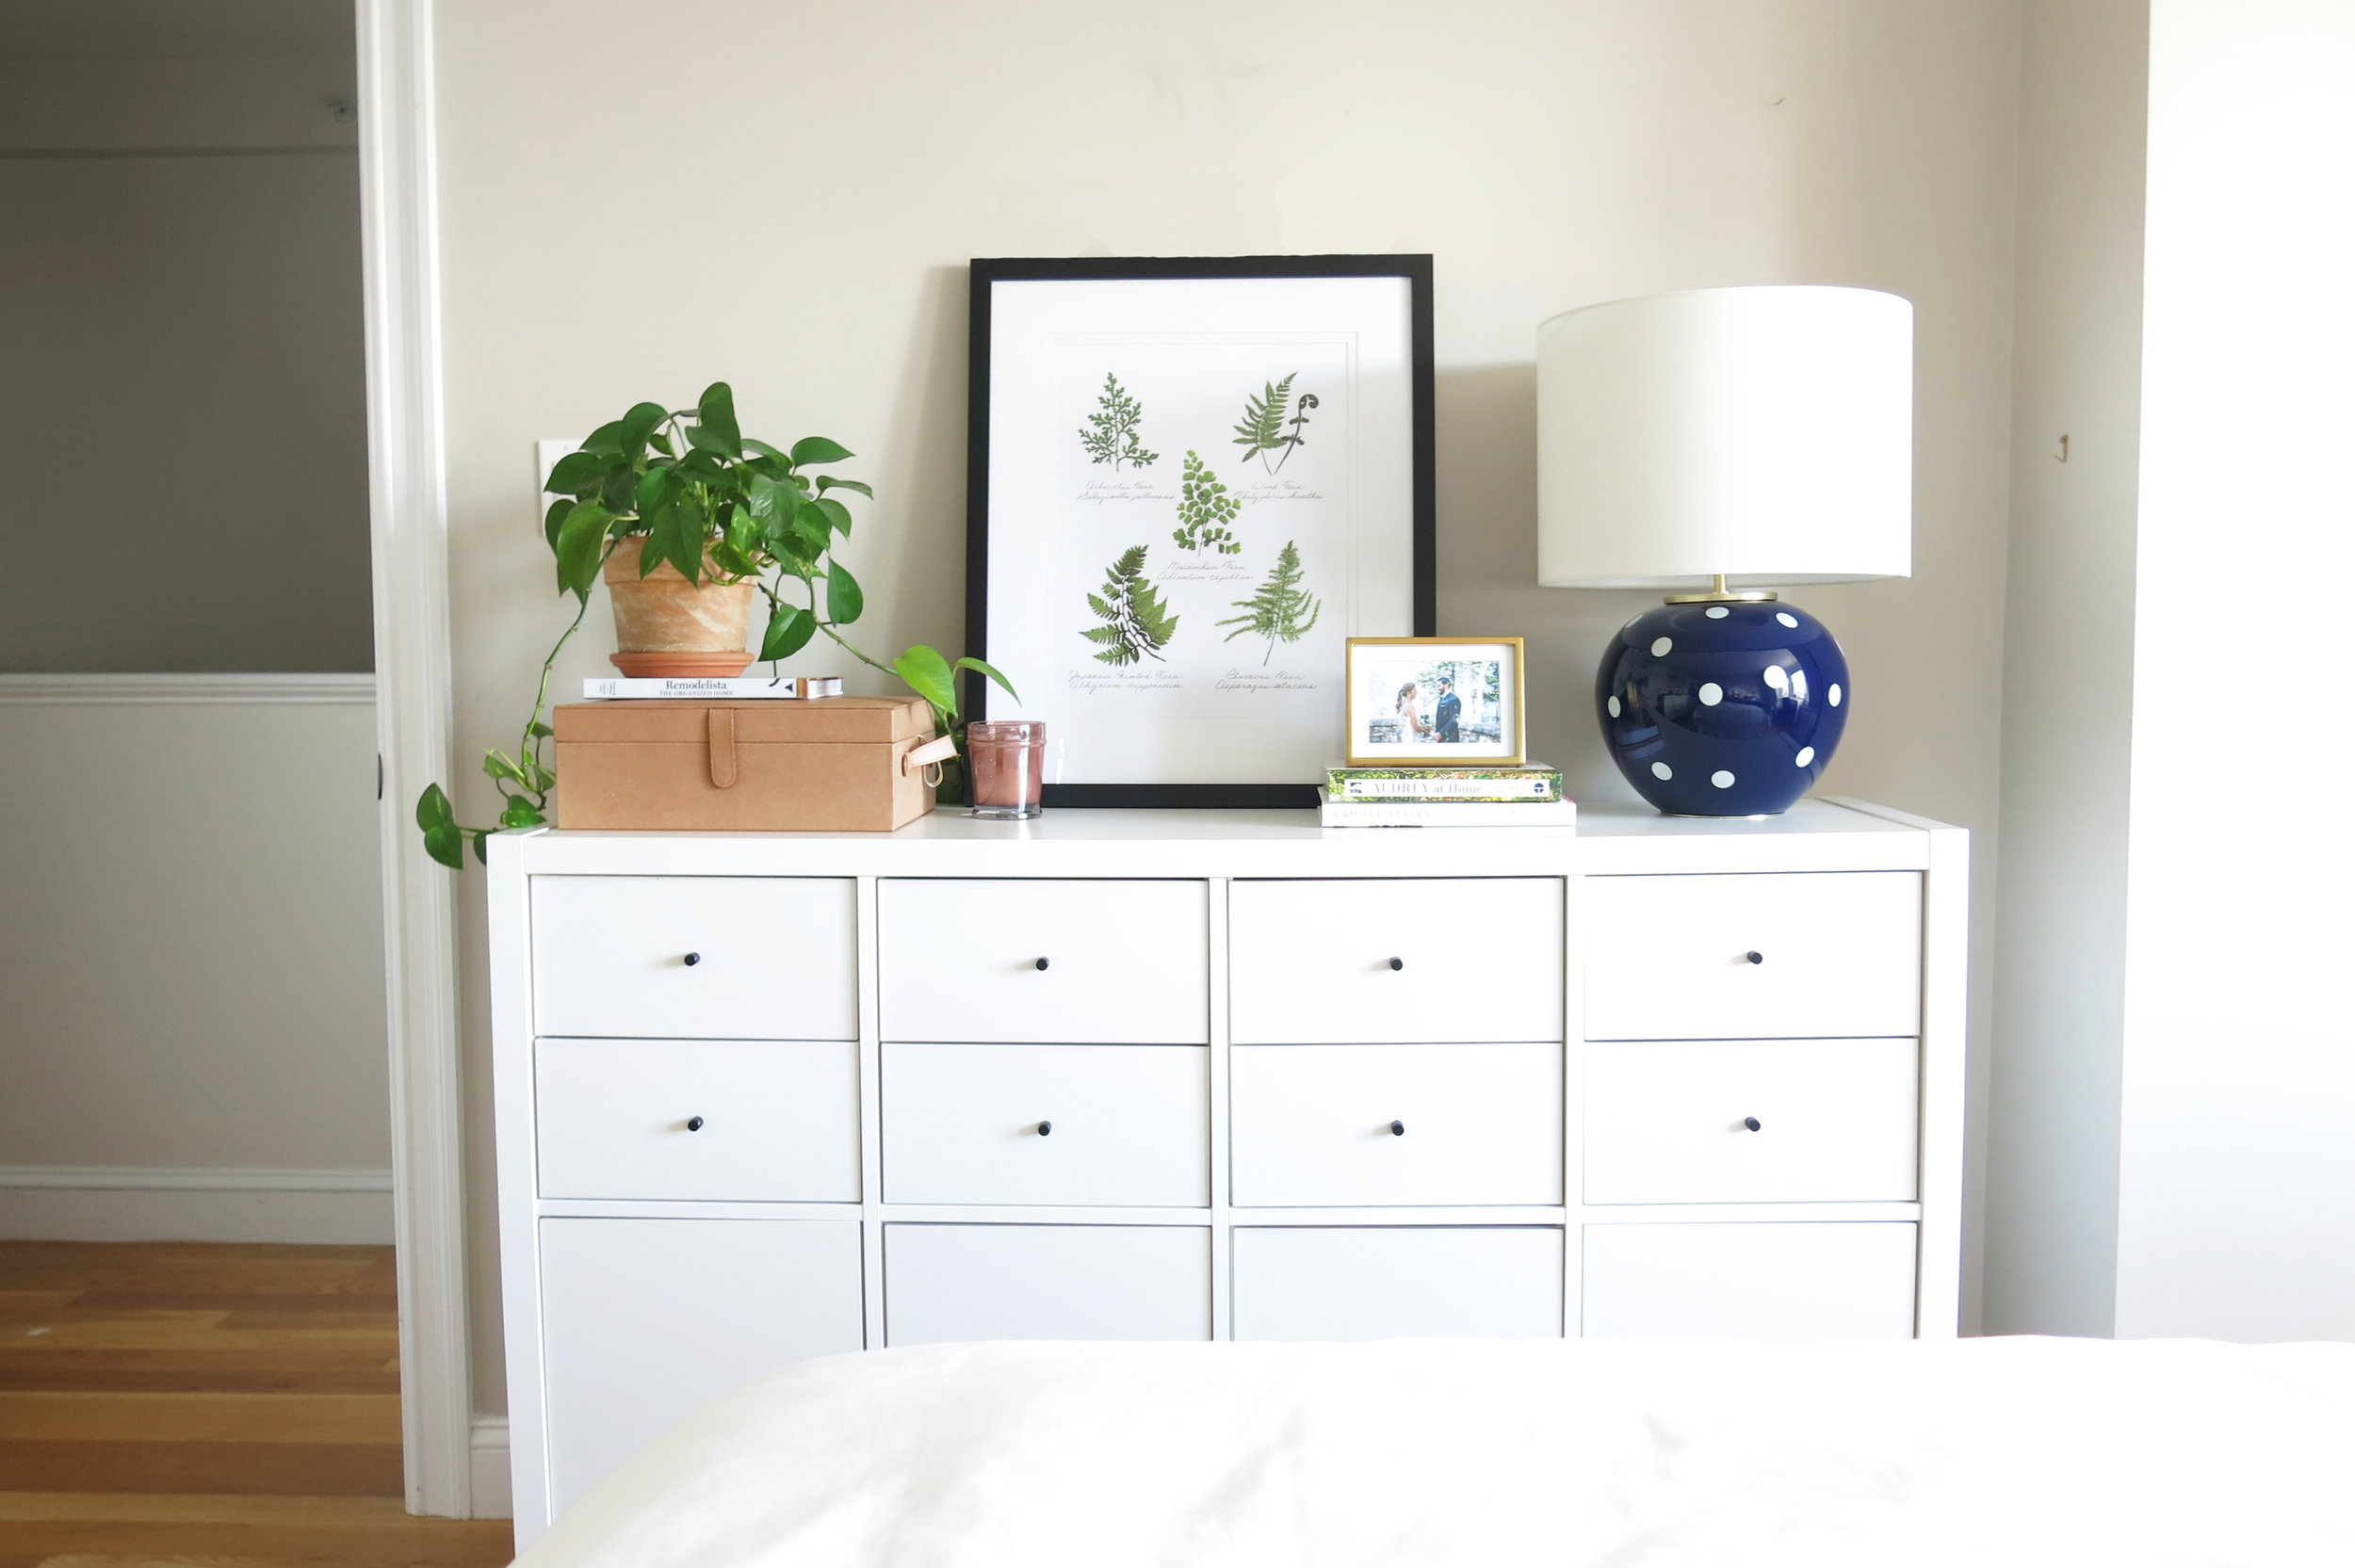 Eclectic styling ideas to style your dresser